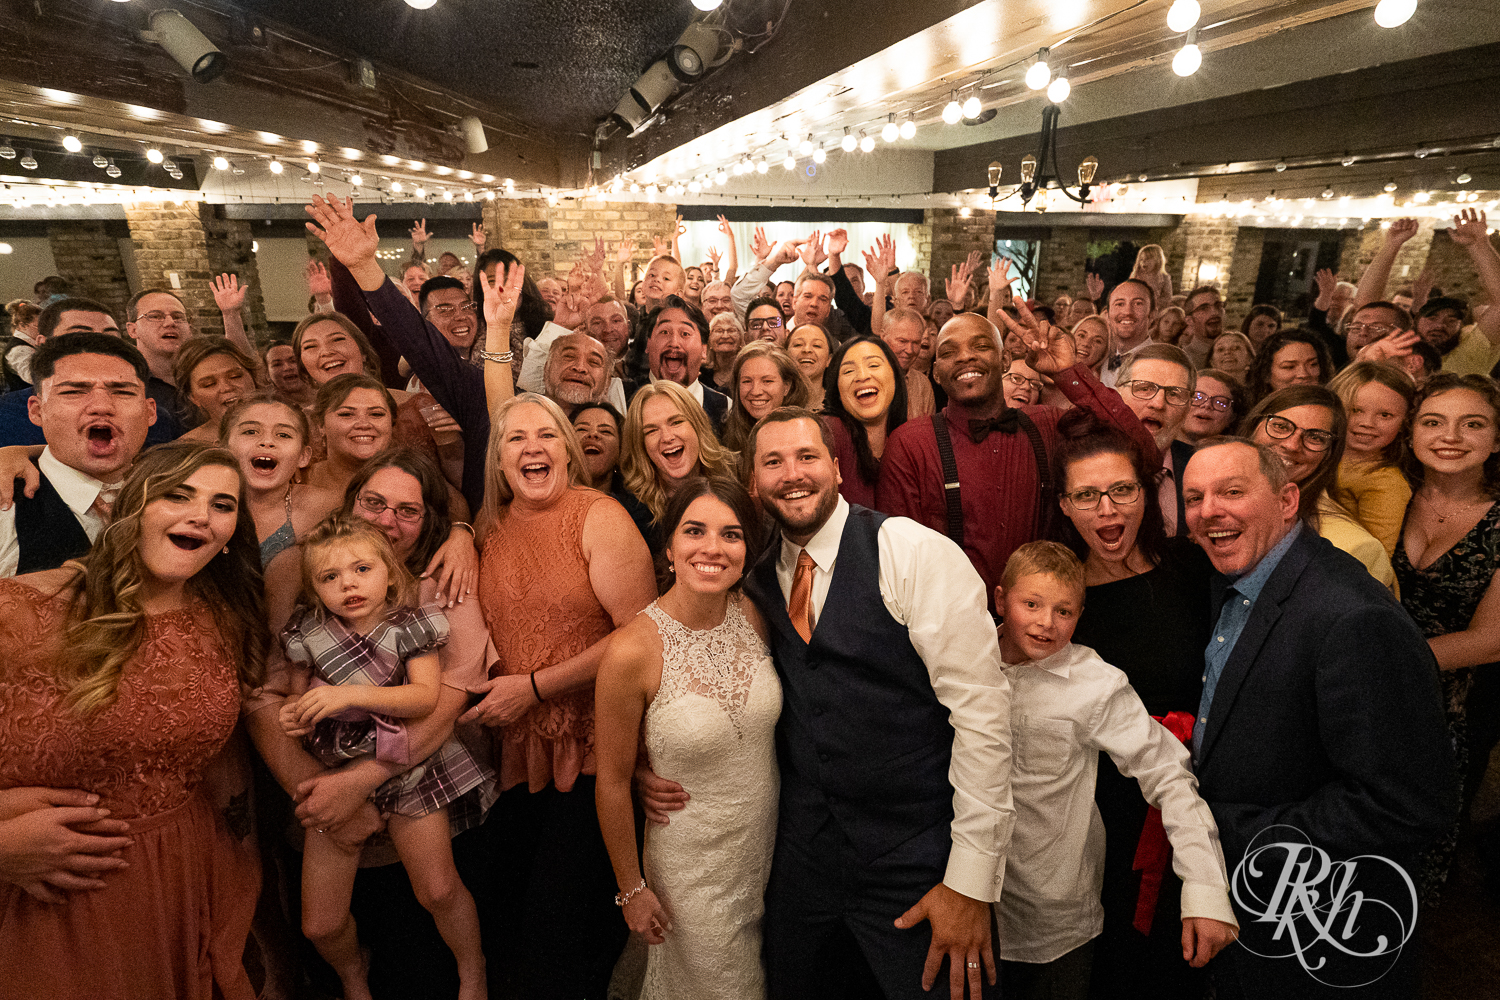 Bride and groom pose for photo with all guests during wedding reception at The Chart House in Lakeville, Minnesota.